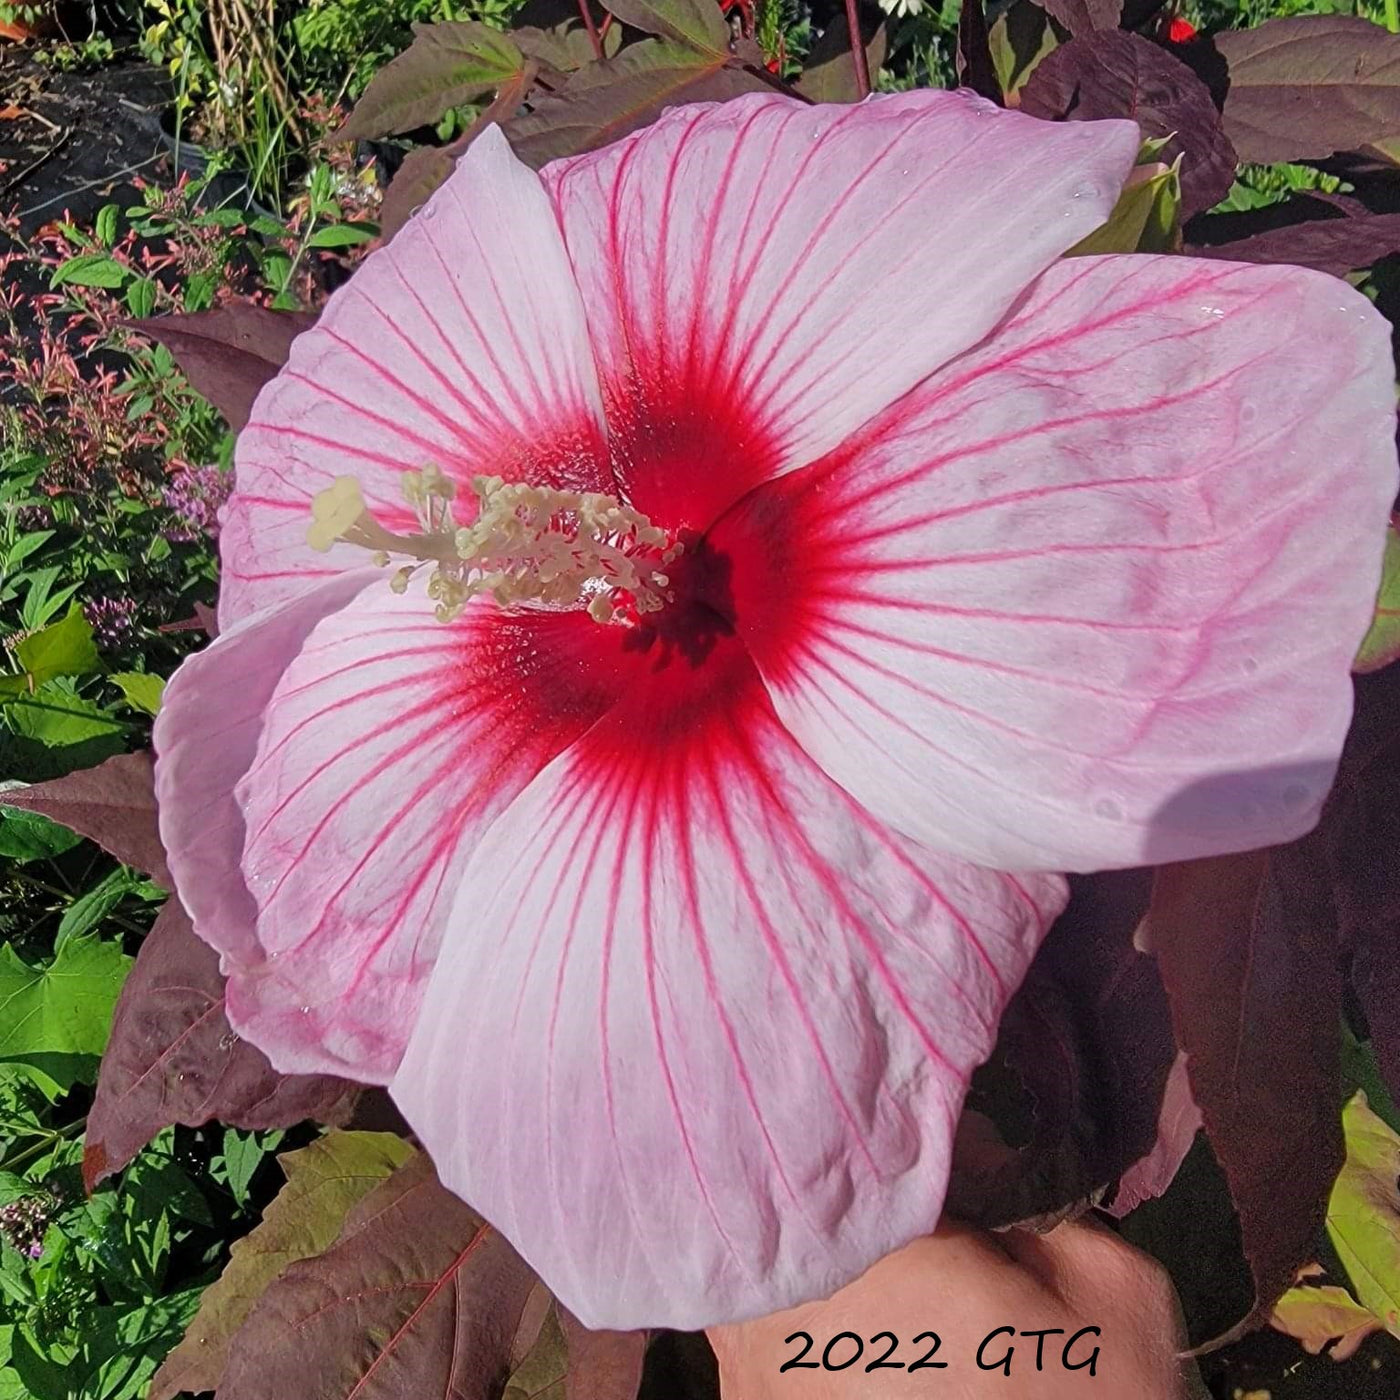 Dried Hibiscus Flower - Quality Sourcing with Fluna